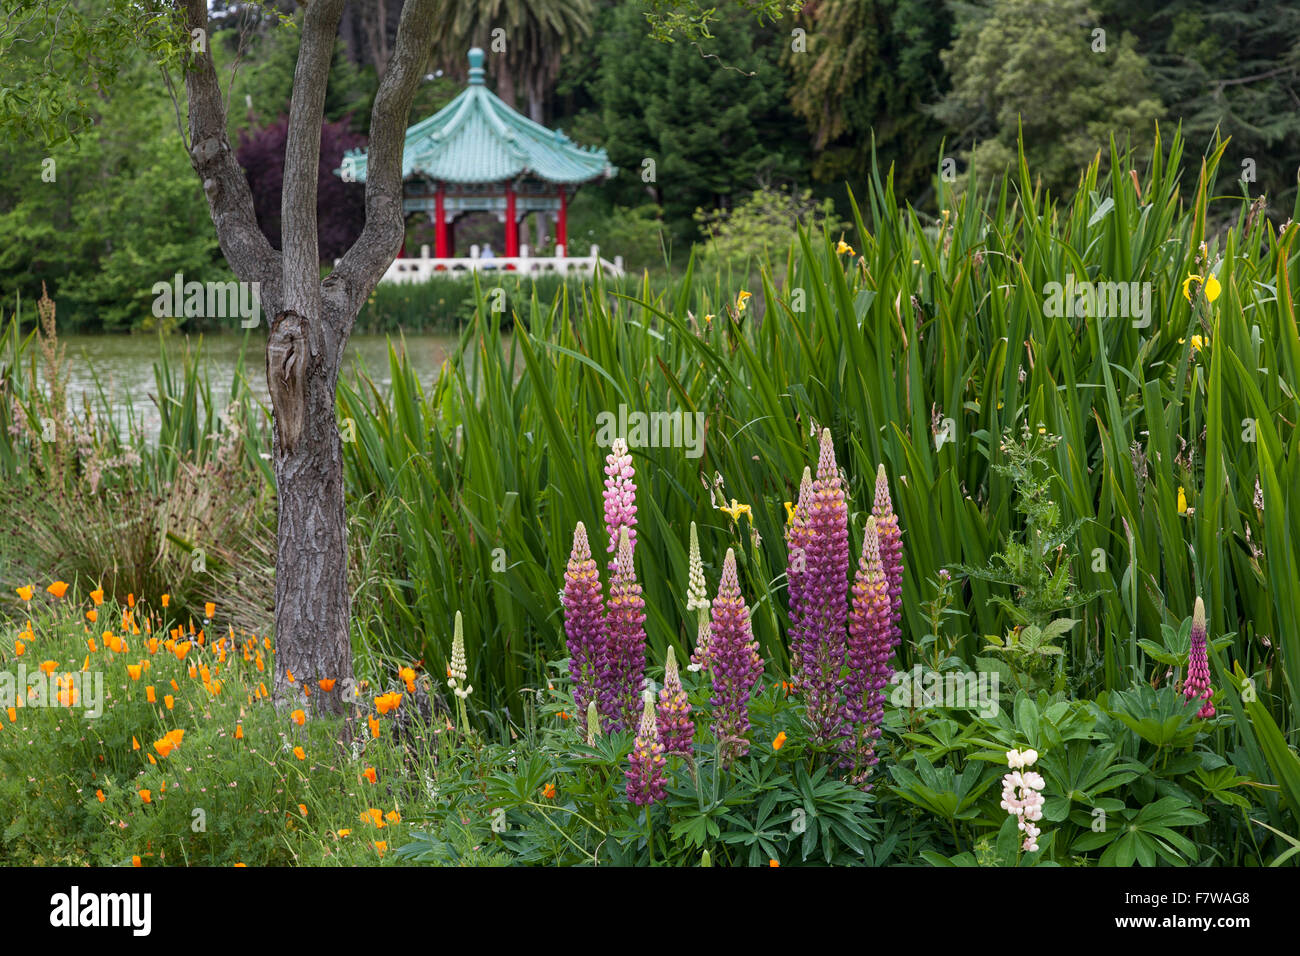 United States, California, San Francisco, Pagoda in Chinese Garden in Golden Gate Park Stock Photo